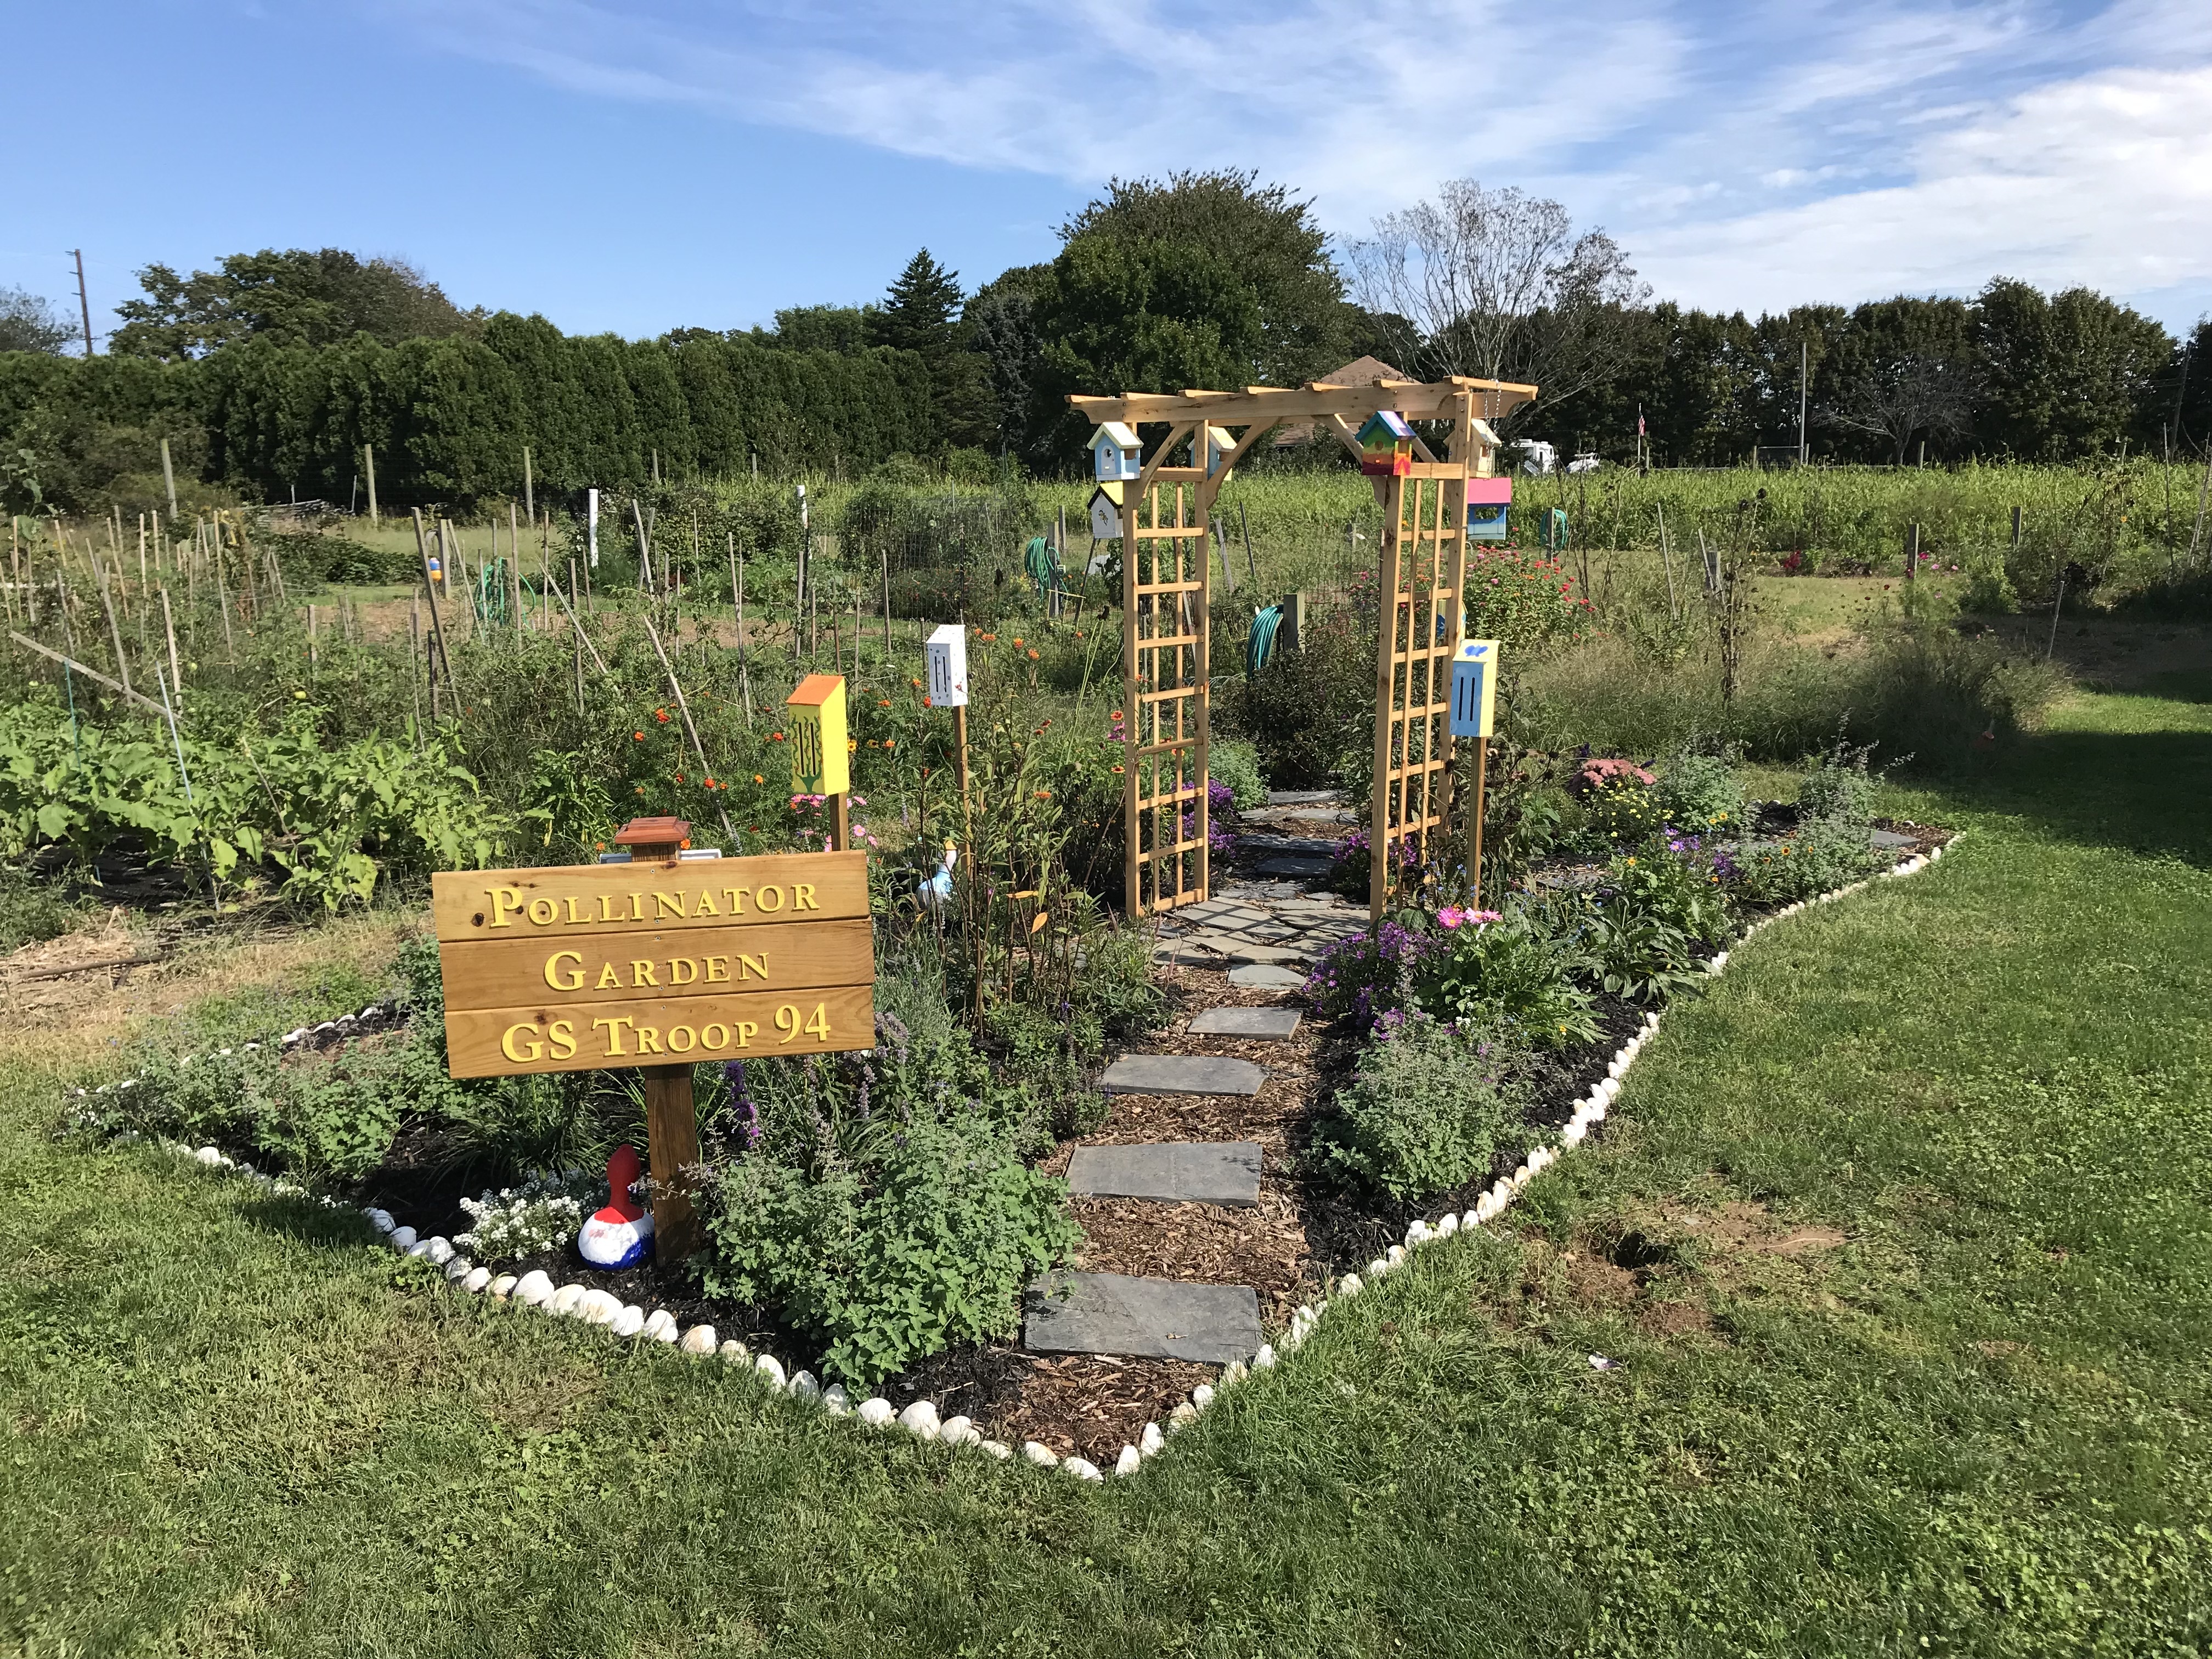 pollinator garden with sign and pathway